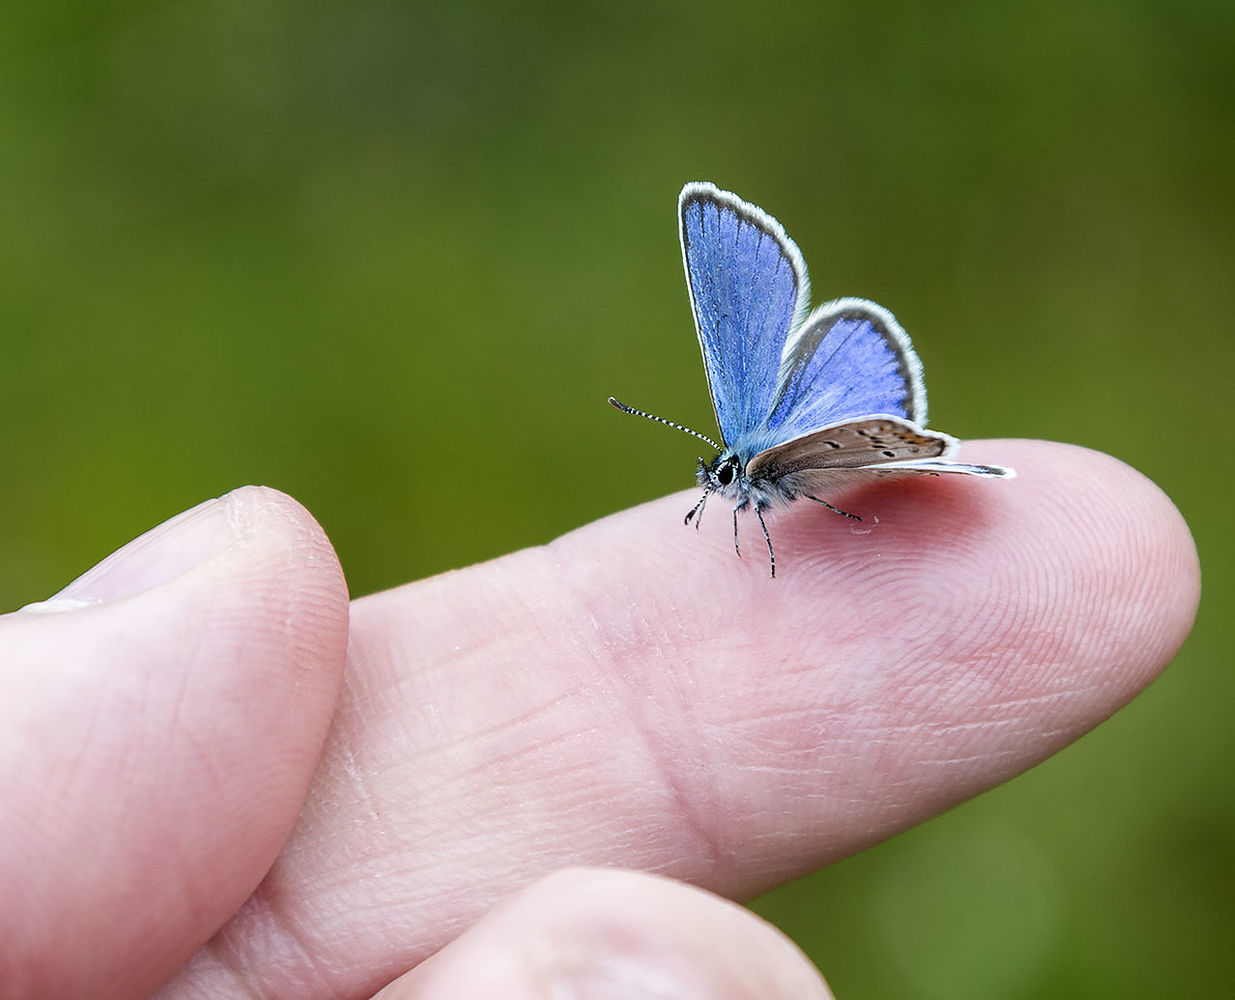 CLOSE-UP OF BUTTERFLY PERCHING ON HAND HOLDING LEAF